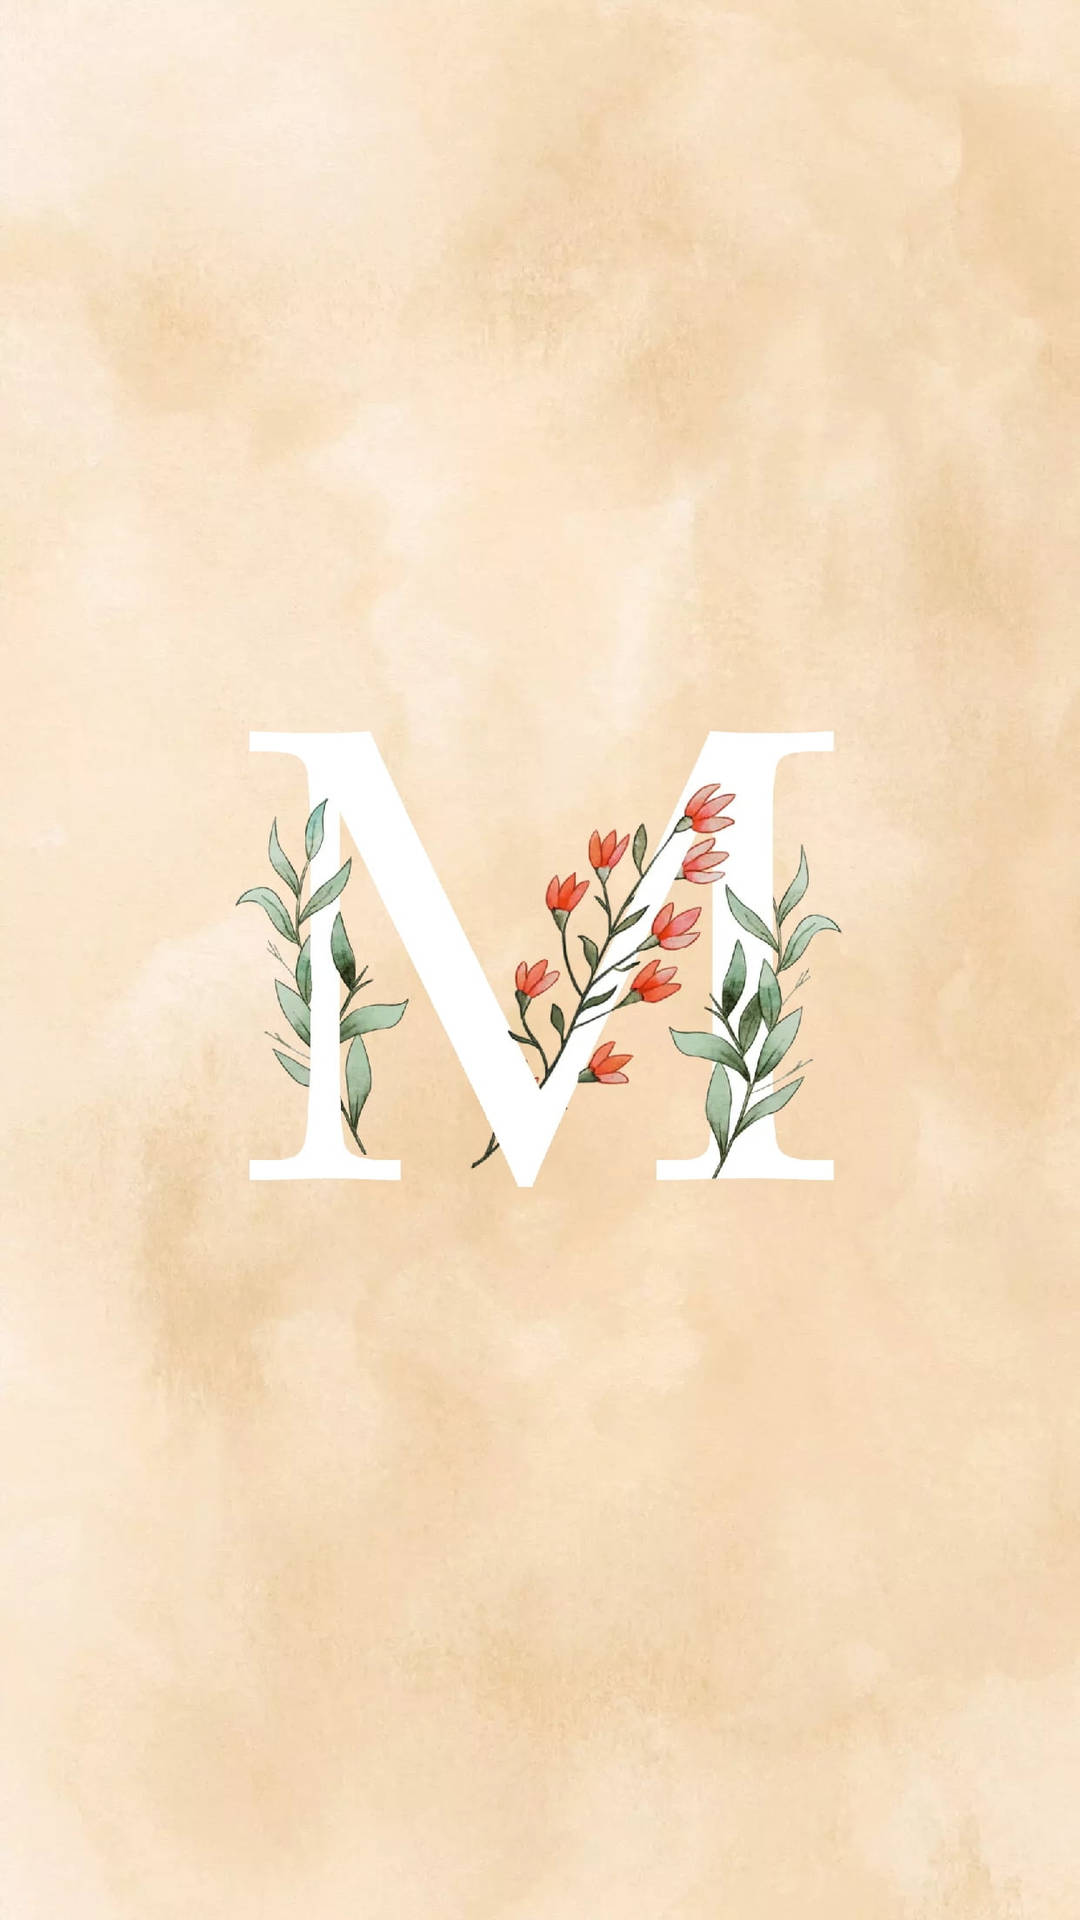 Letter M Small Flowers Background